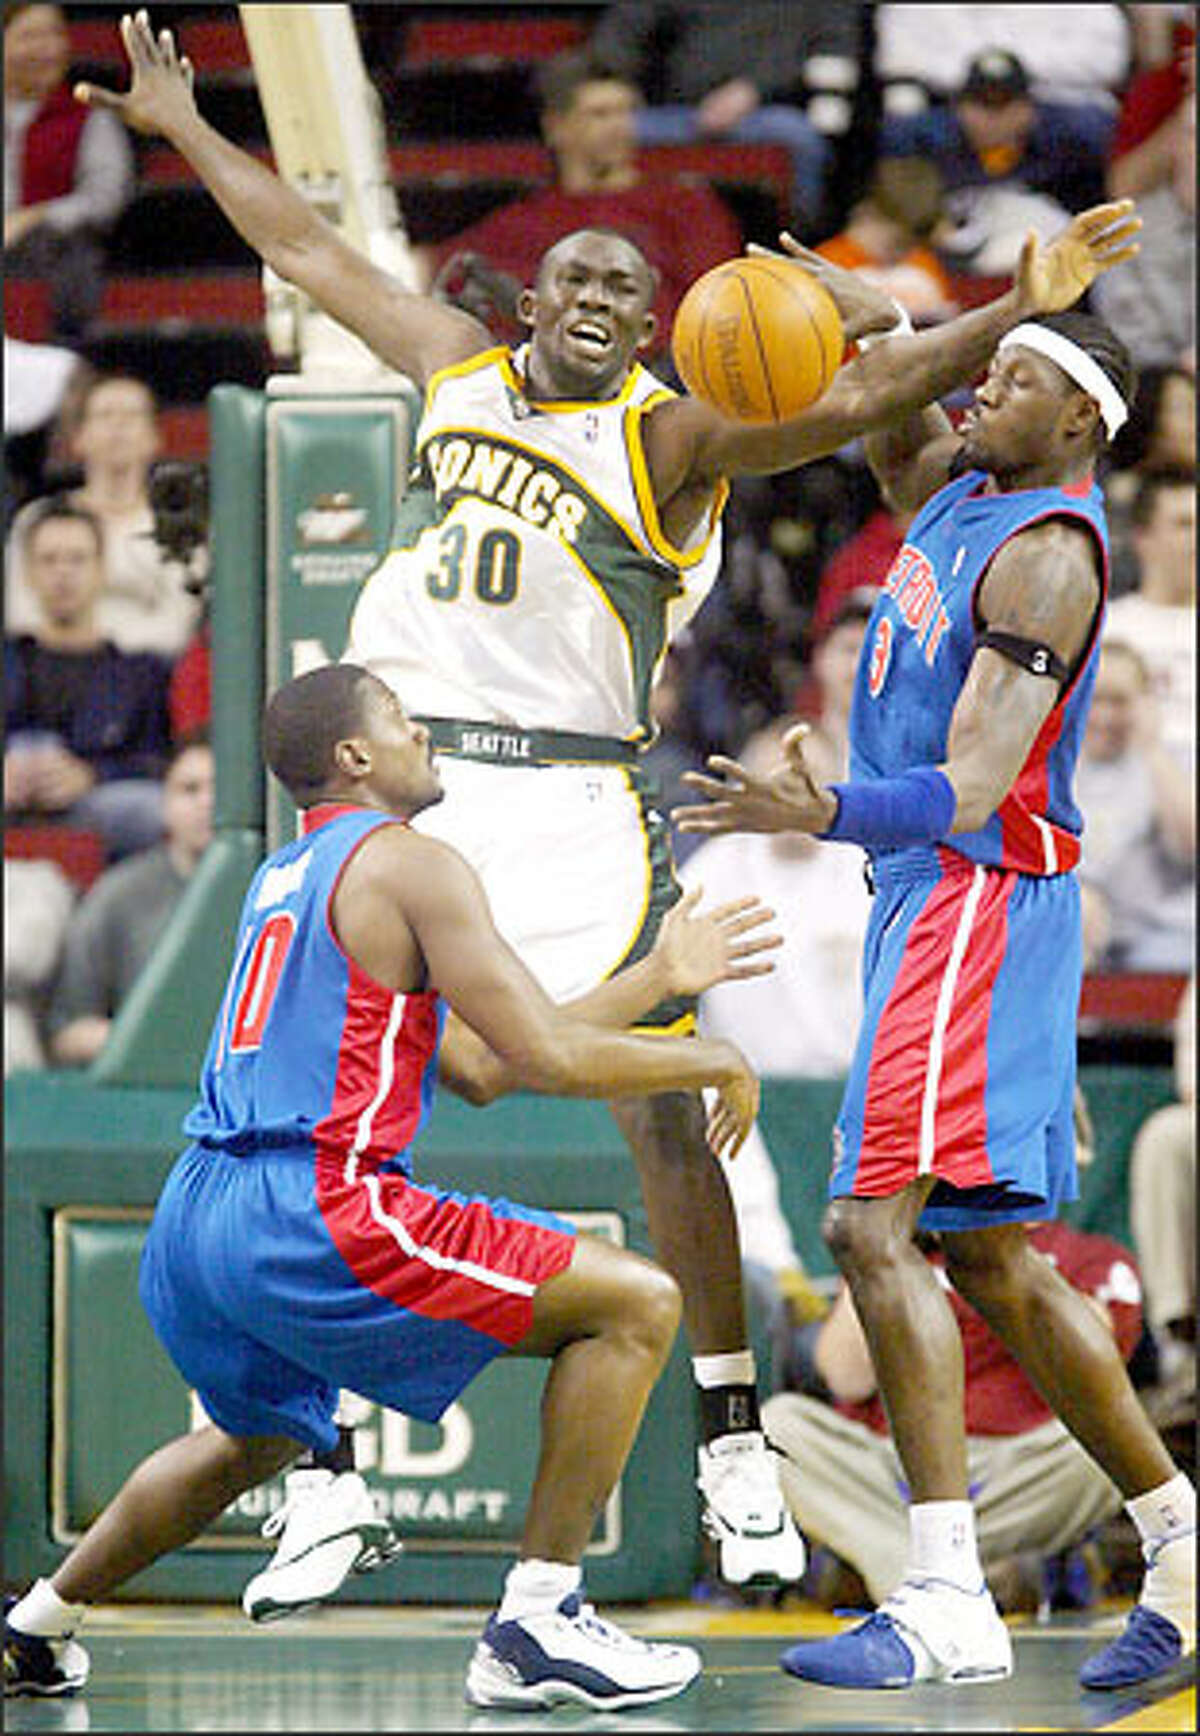 Detroit's Lindsey Hunter, left, and Ben Wallace, right, scrap with Reggie Evans of the Sonics for the ball.